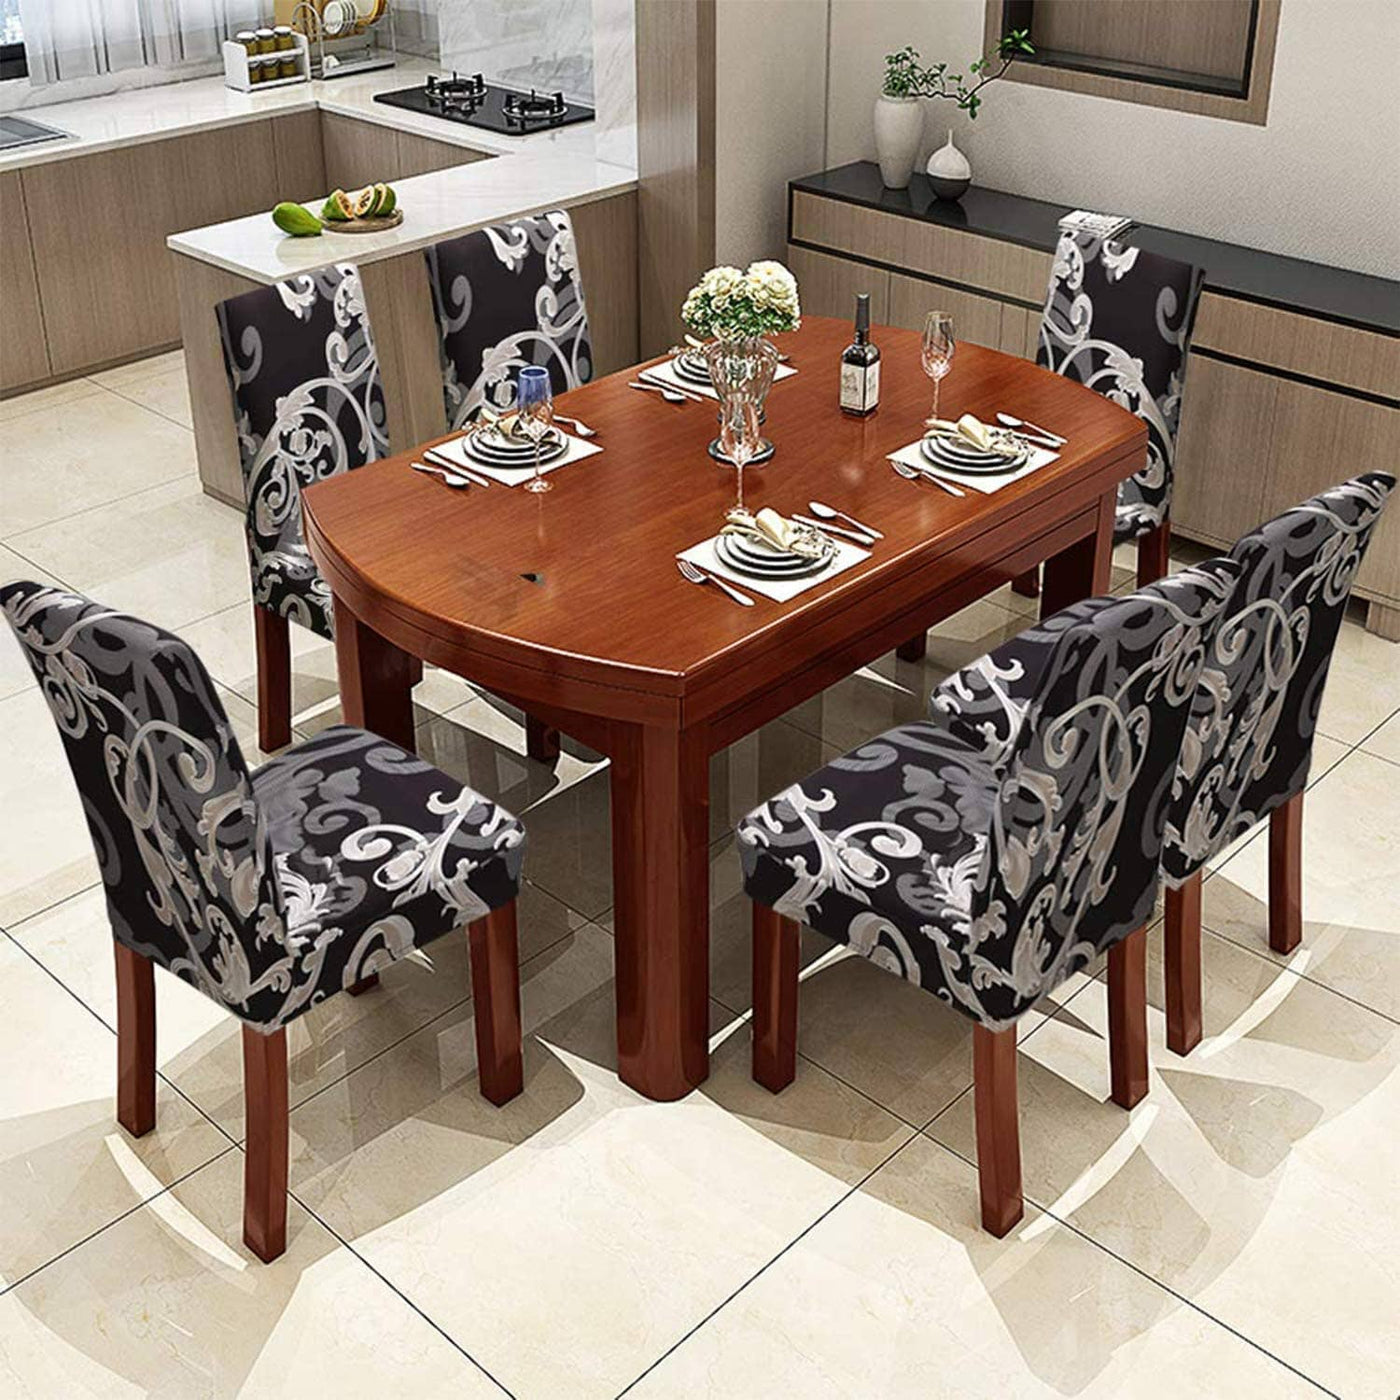 Grey Flower Pattern Premium Chair Cover - Stretchable & Elastic Fitted Great Happy IN 2 PCS - ₹799 